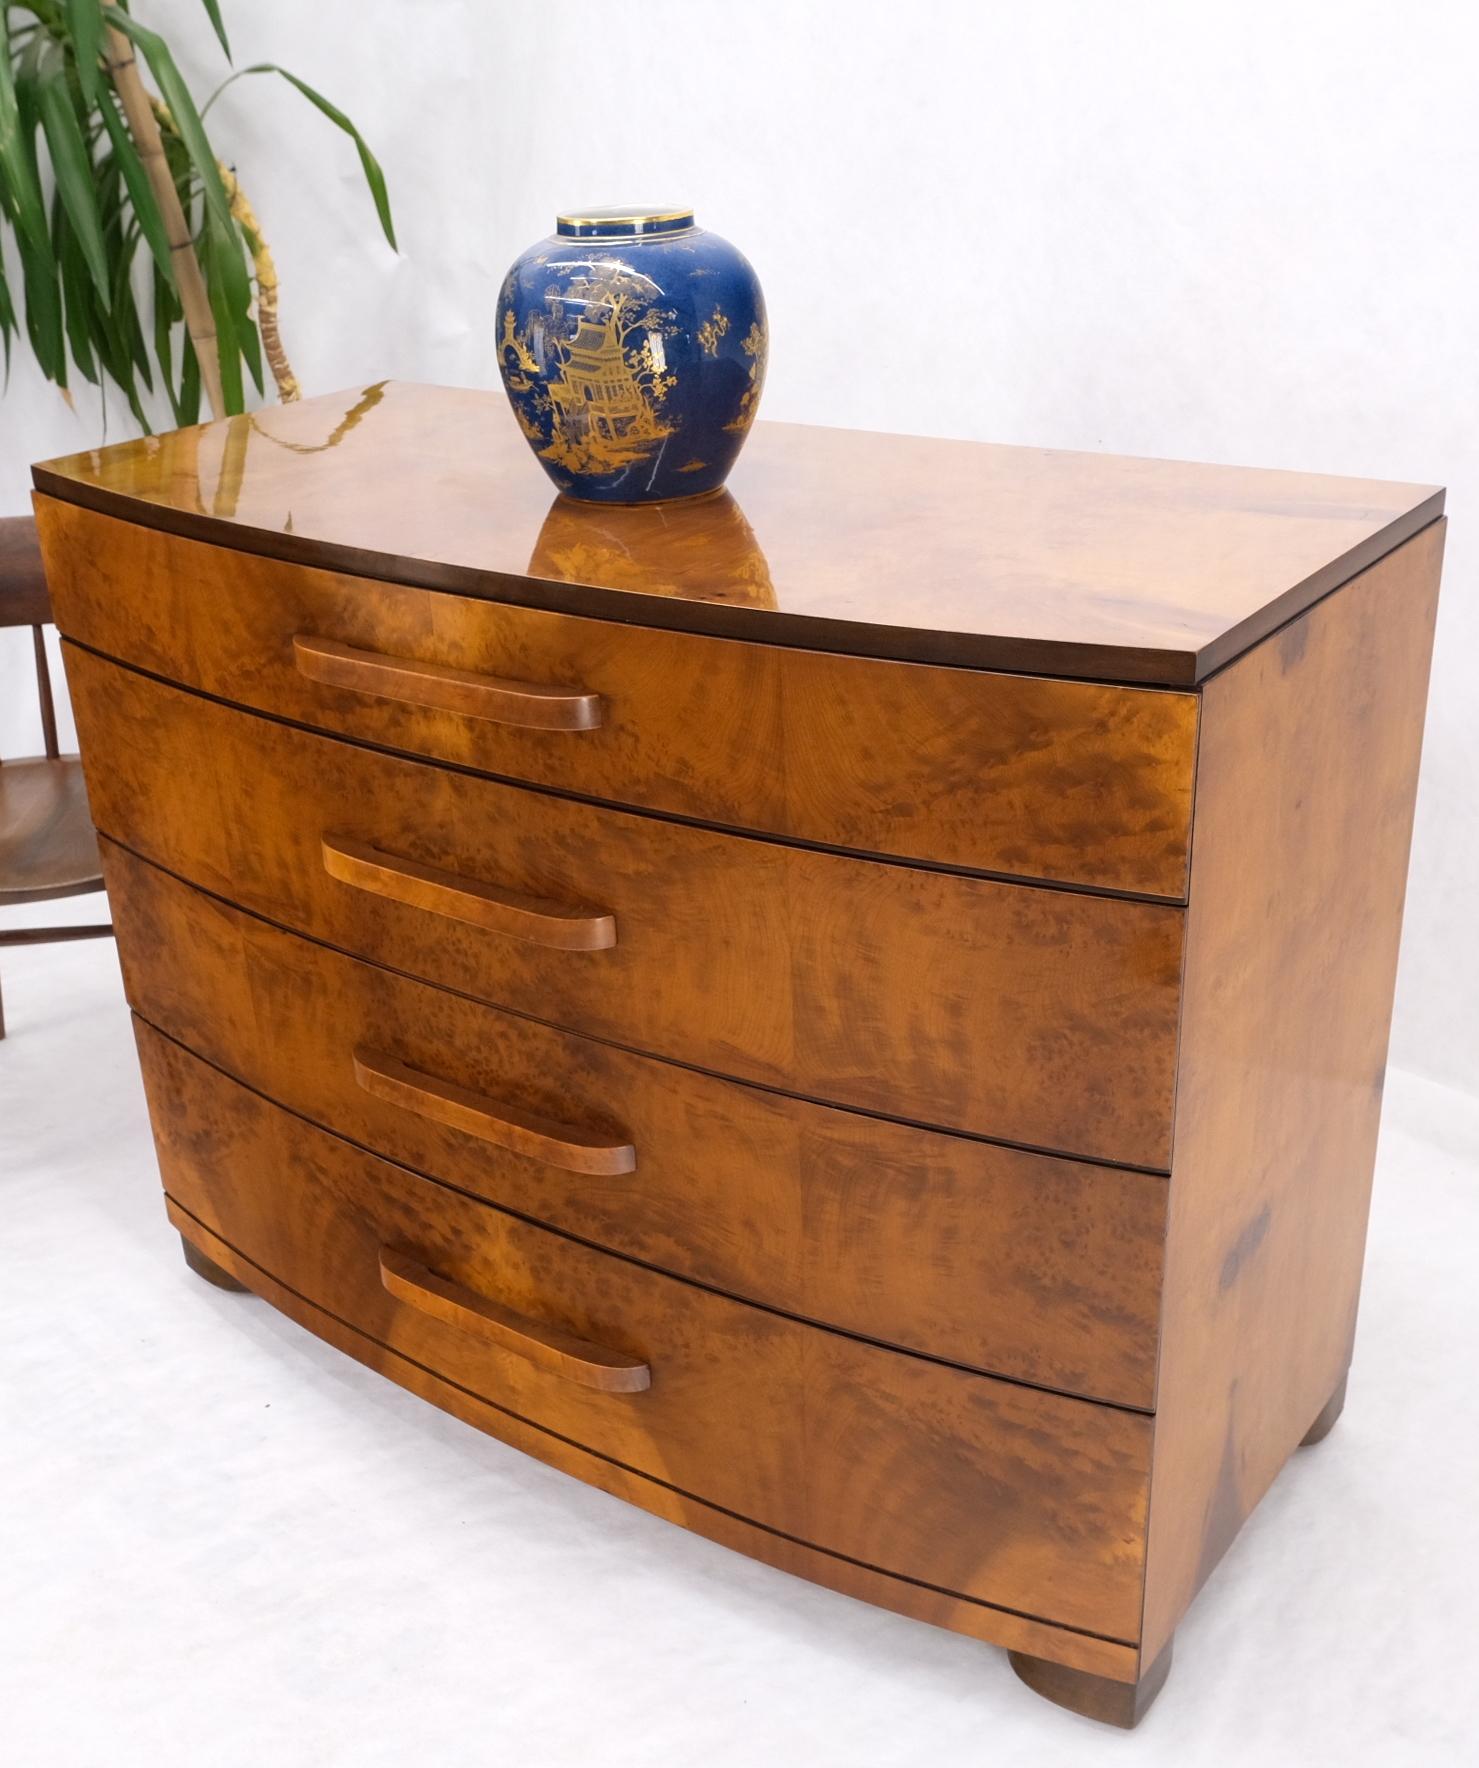 Art Deco Mid-Century Modern bow front burl wood 4 drawer dresser chest of drawers.